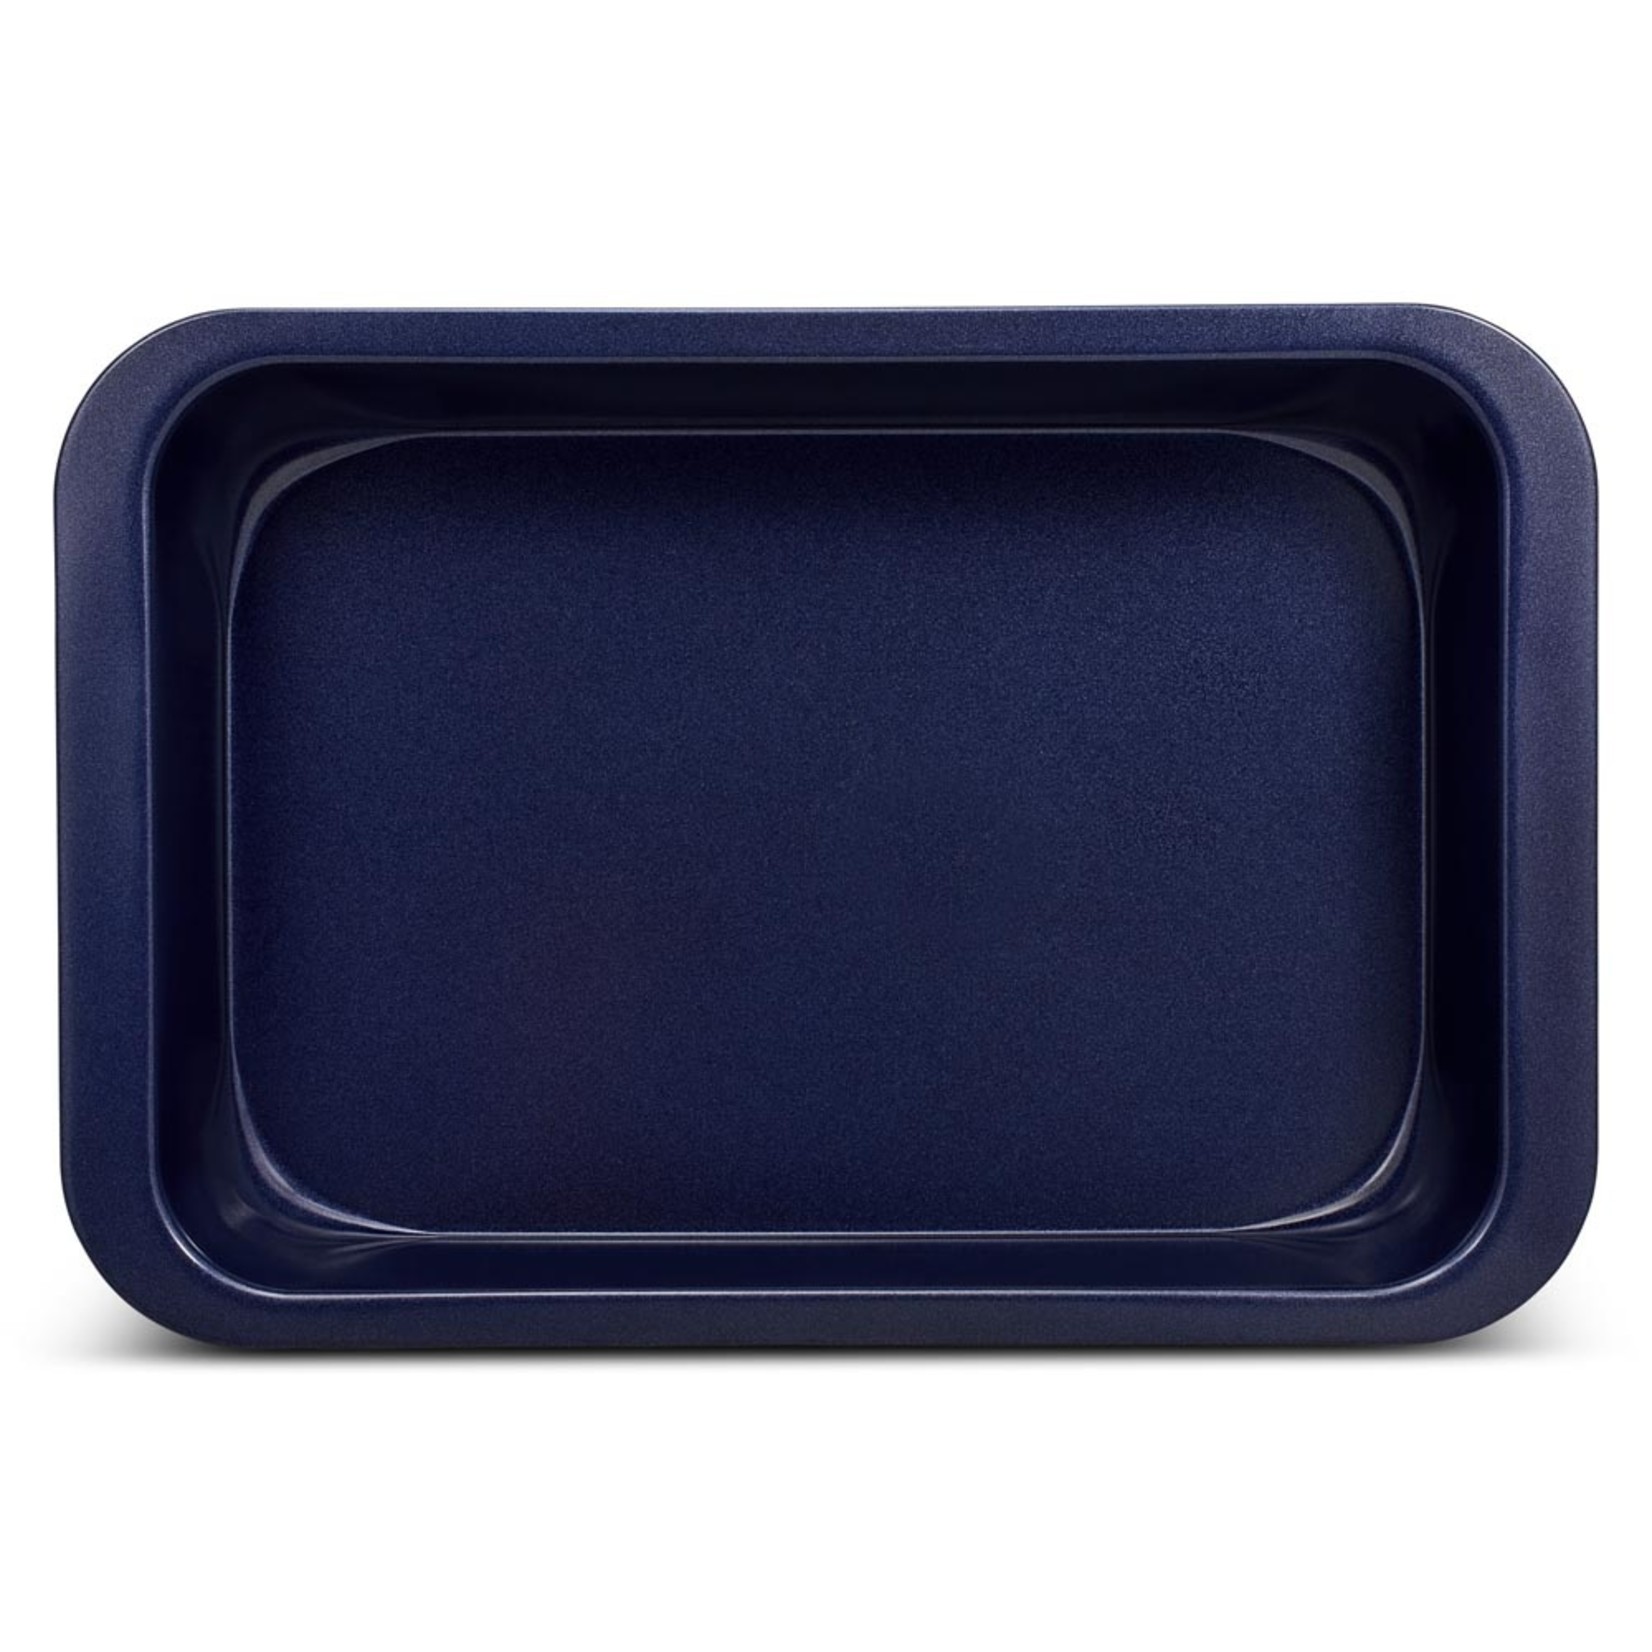 ZYLISS ZYLISS Rectangle Bakeware Oven Tray